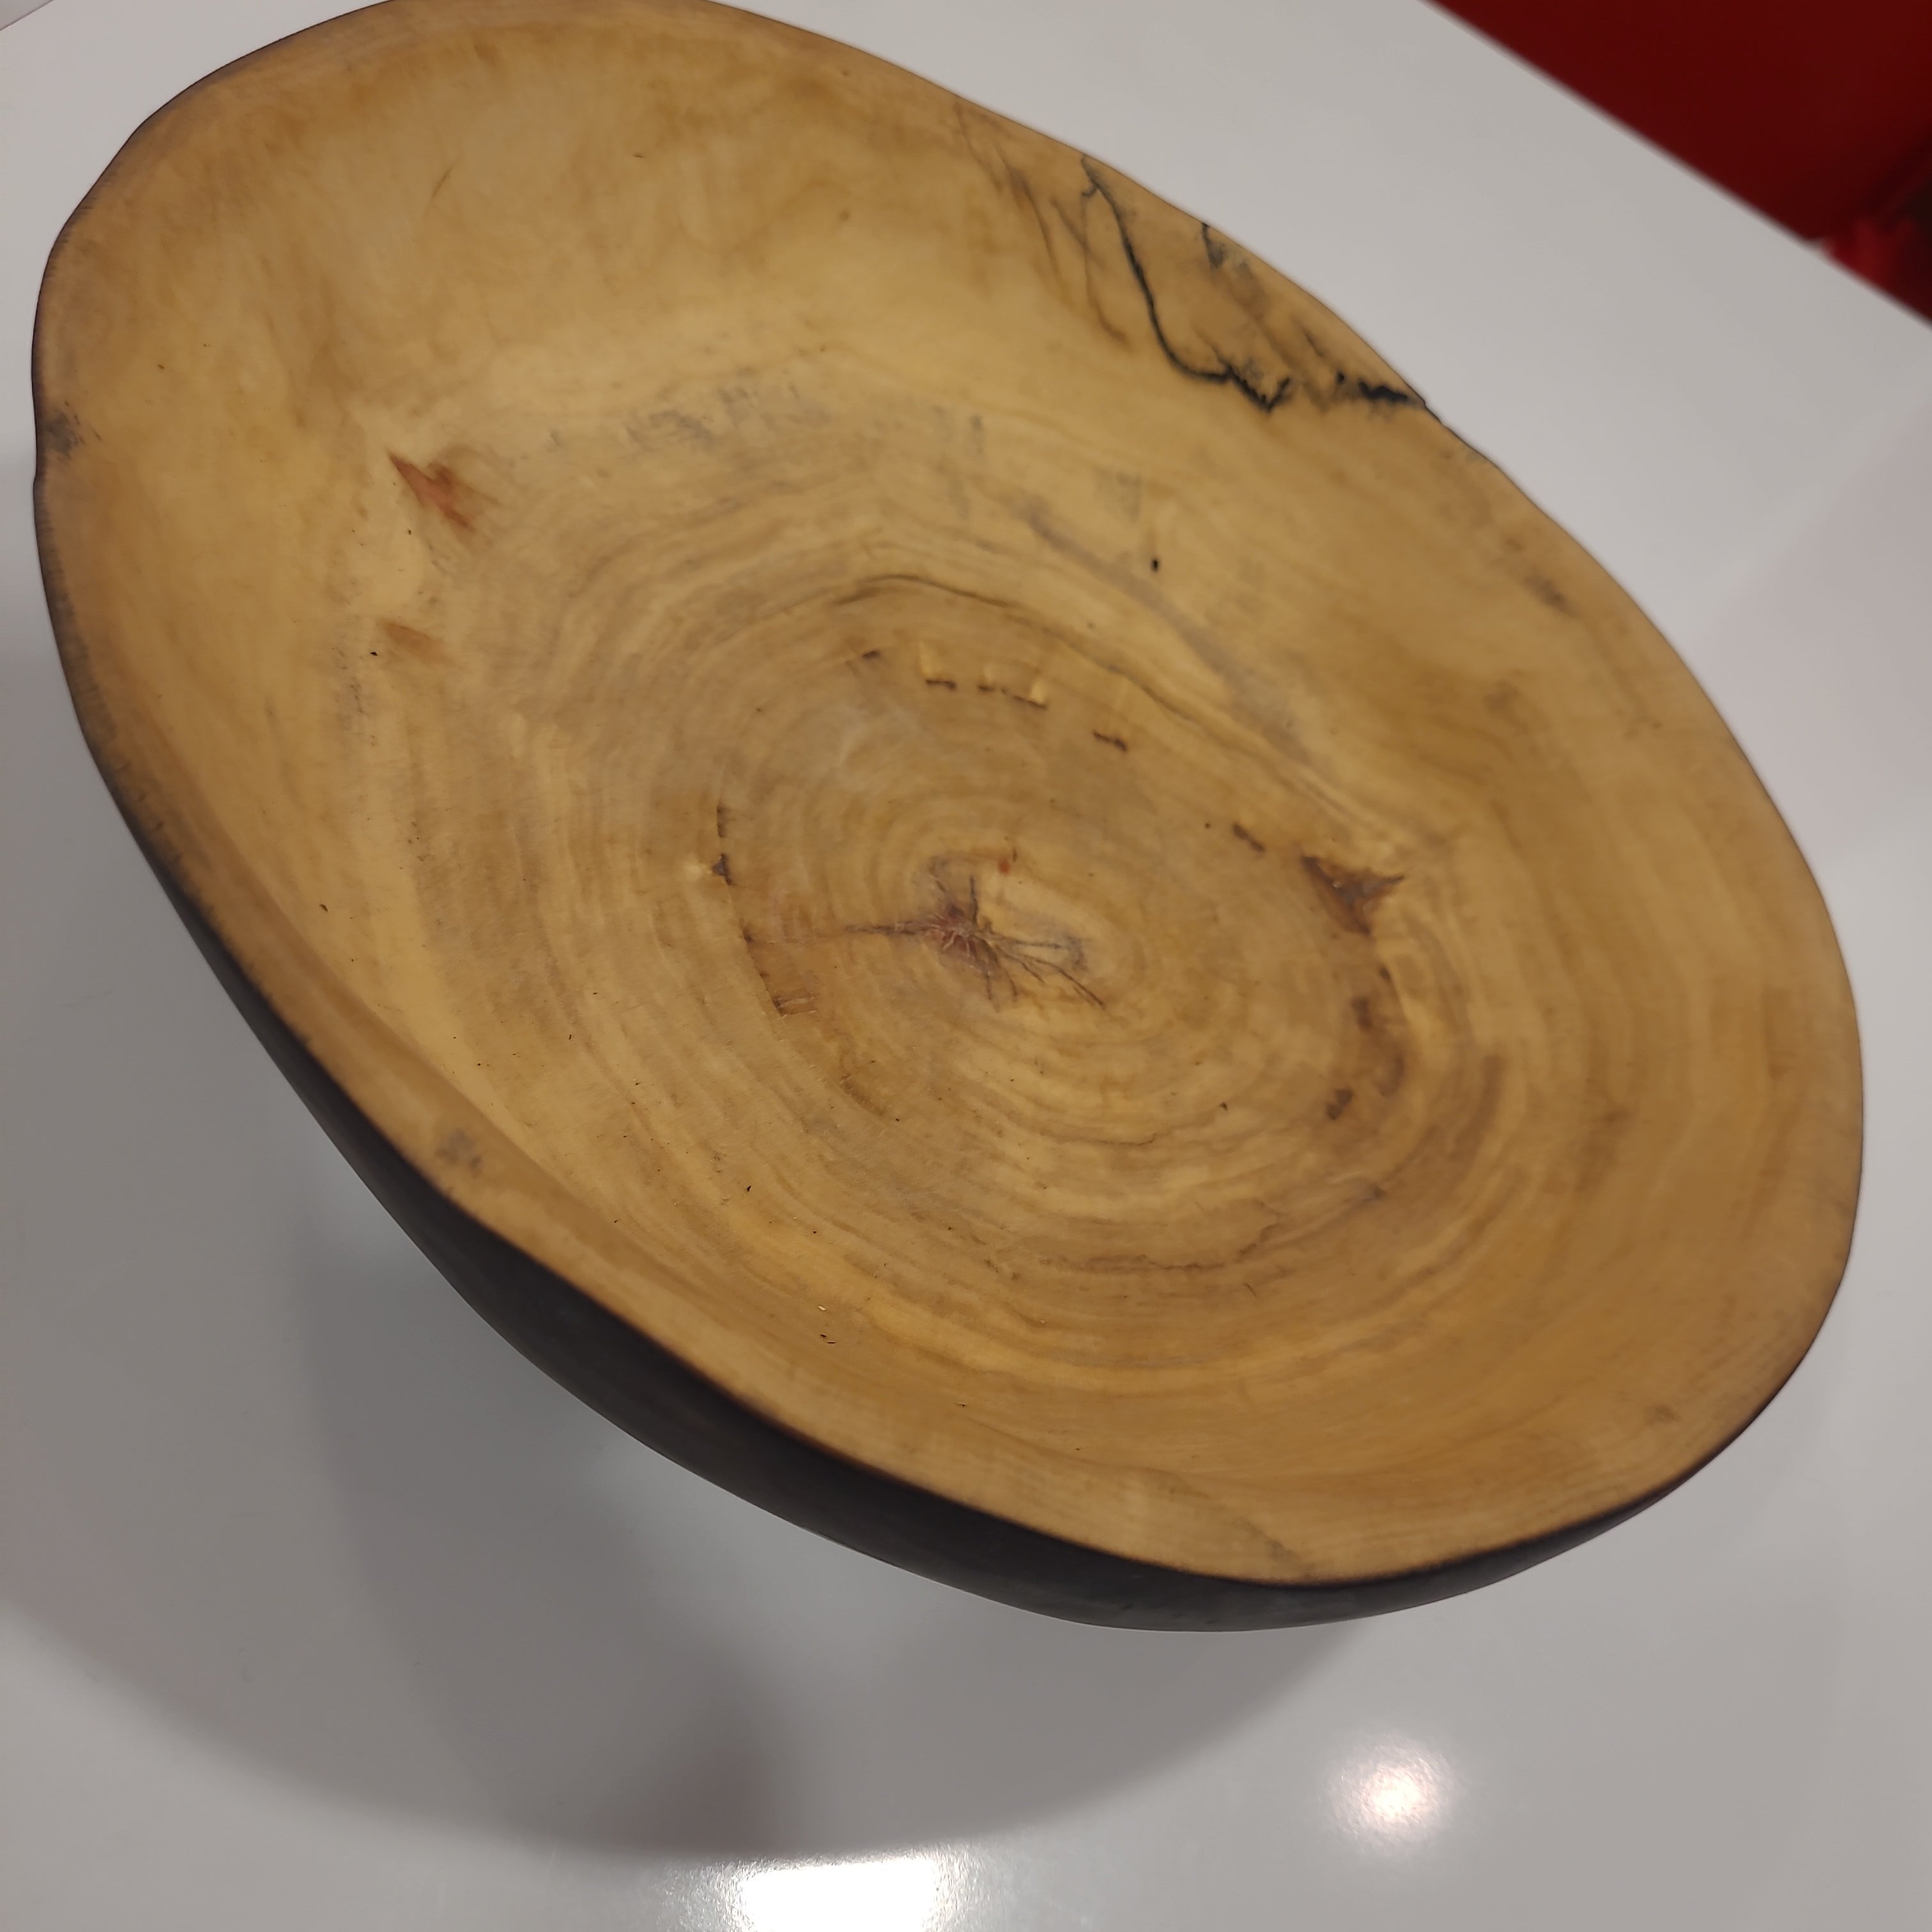 Bent into shape large maple with black bowl